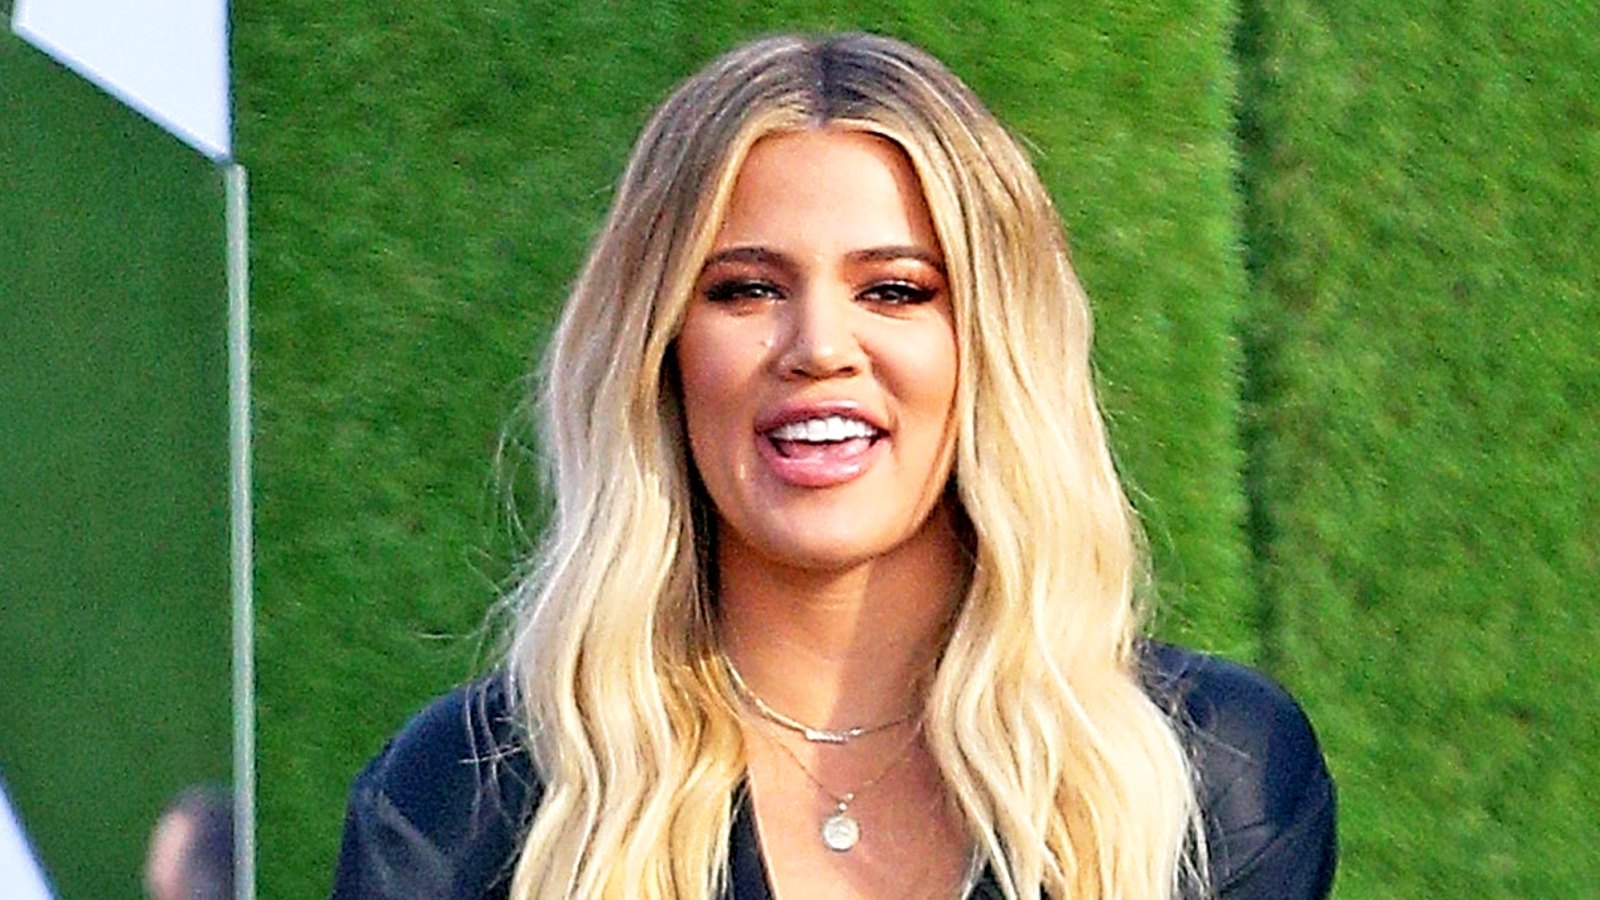 Khloe Kardashian promotes her 'Good American' clothing line at the Westfield Mall in Century City, California.